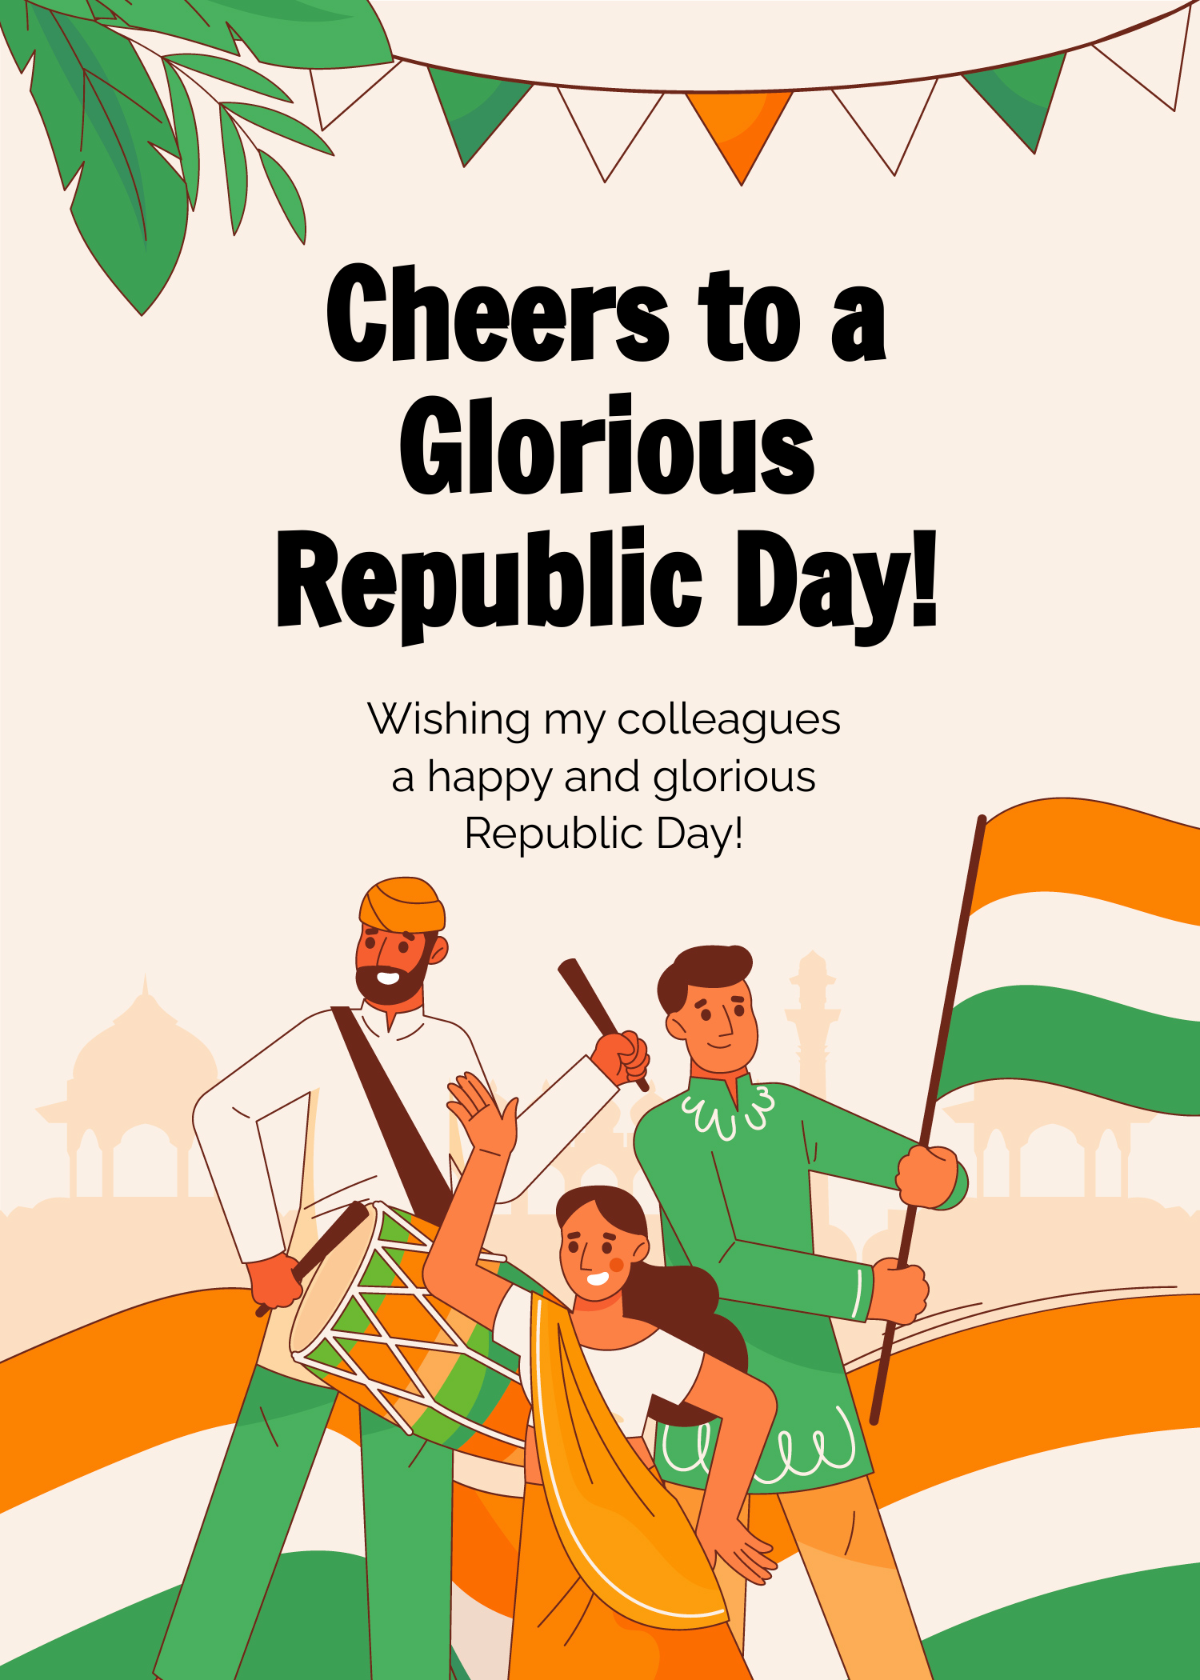 Republic Day Wishes to Colleagues Template